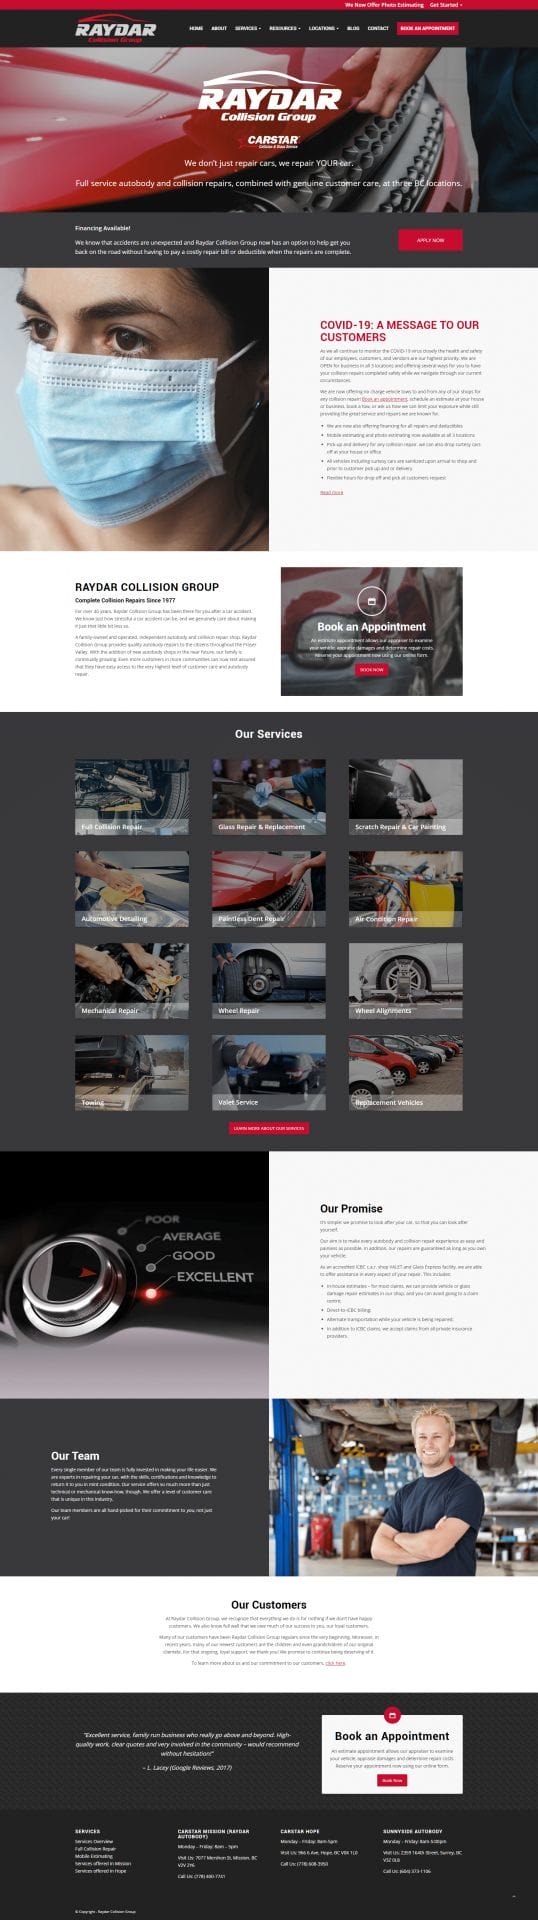 Raydar Collision website design homepage layout example